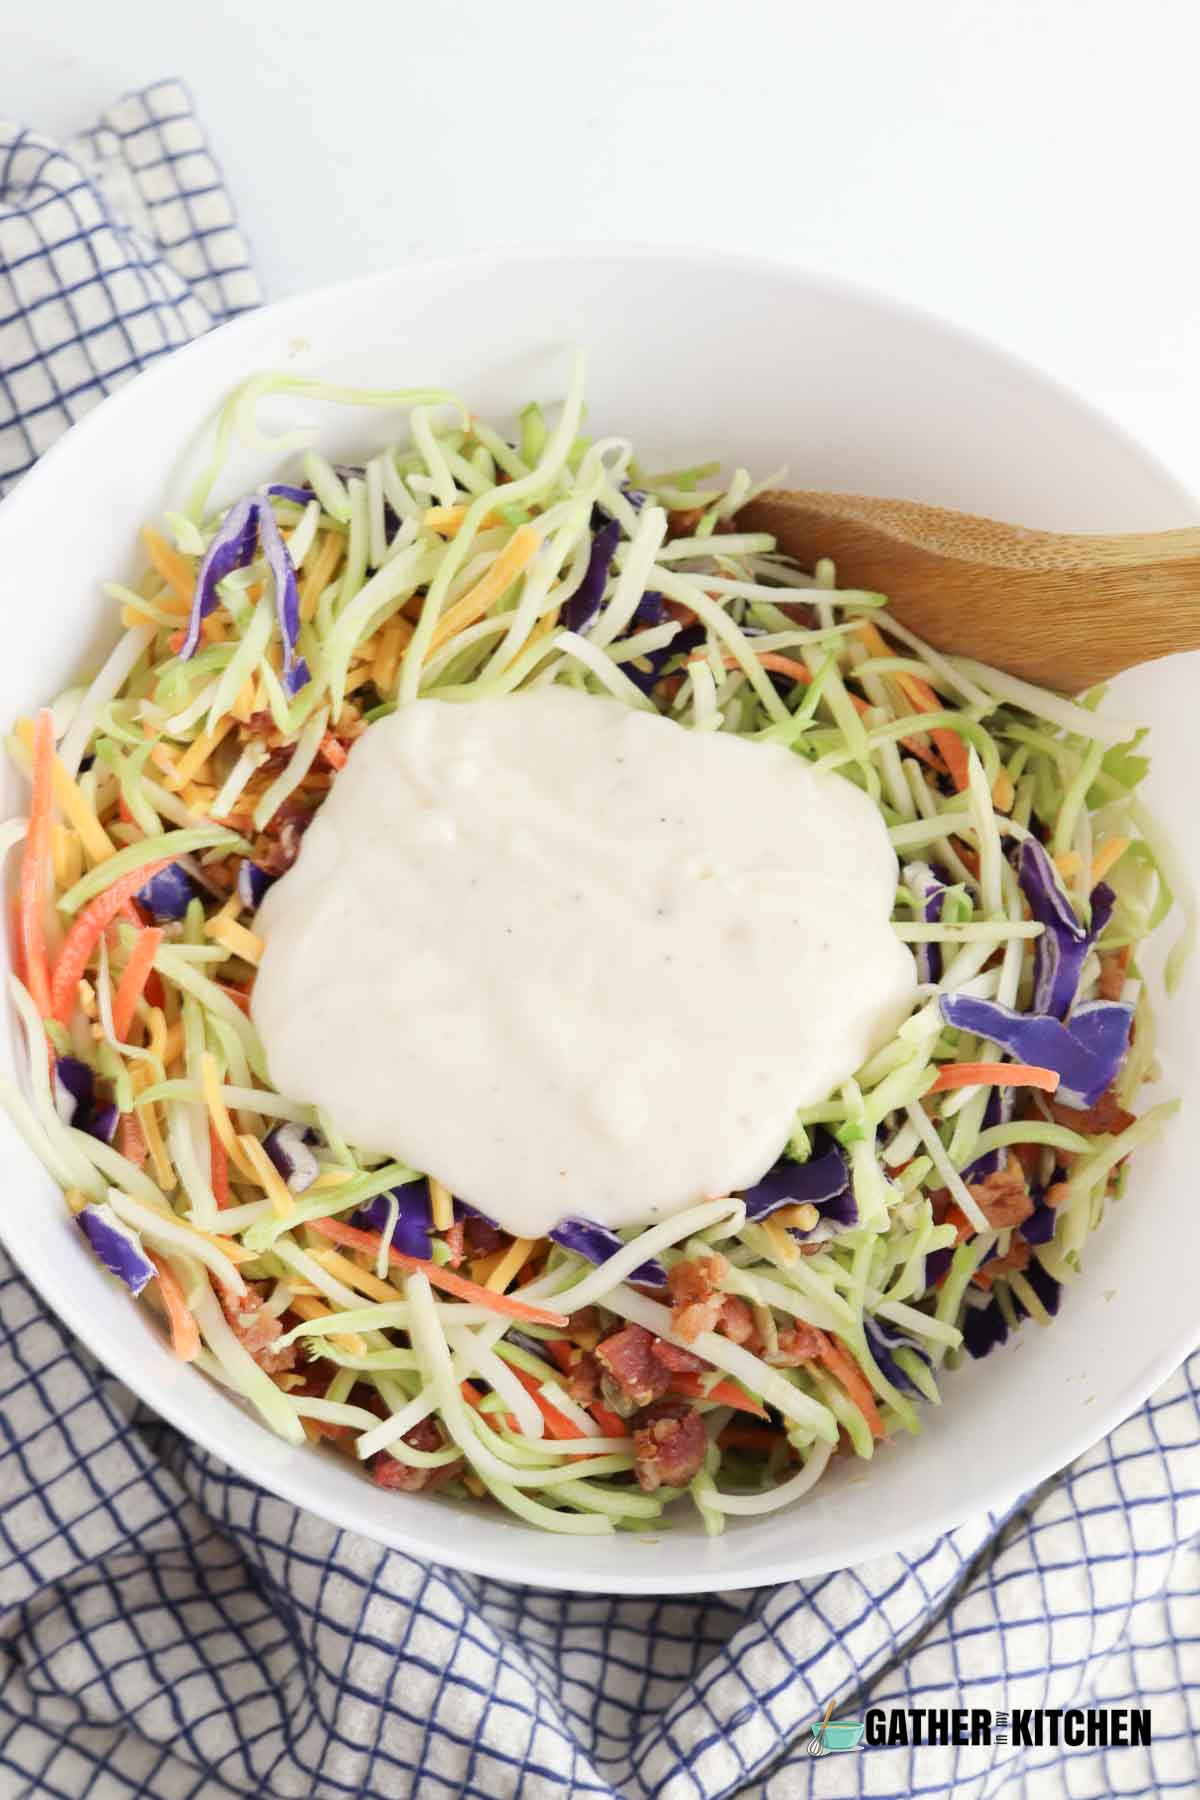 Broccoli slaw ingredients combined together with the dressing on top of them.